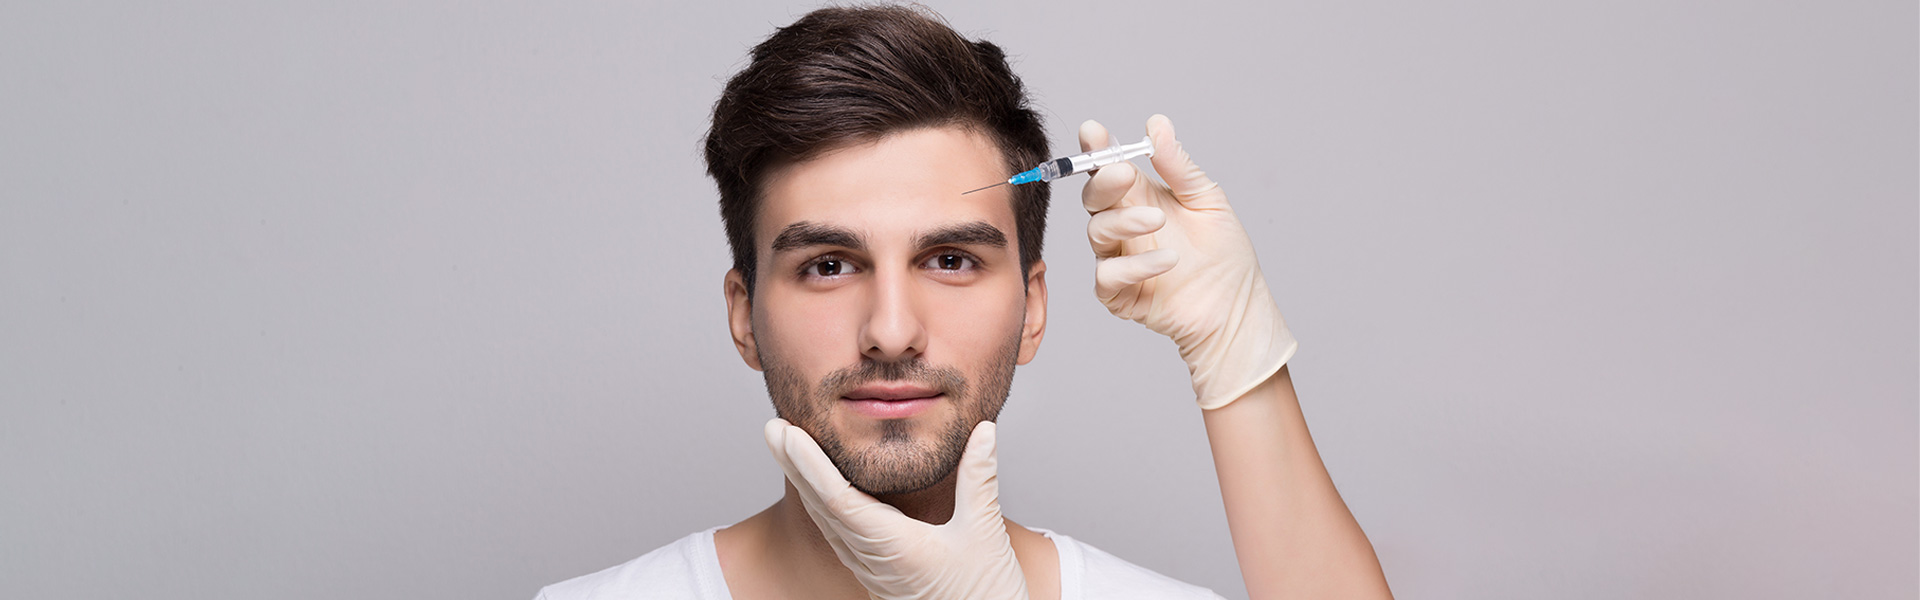 Did you know there are dental benefits of Botox Treatment?